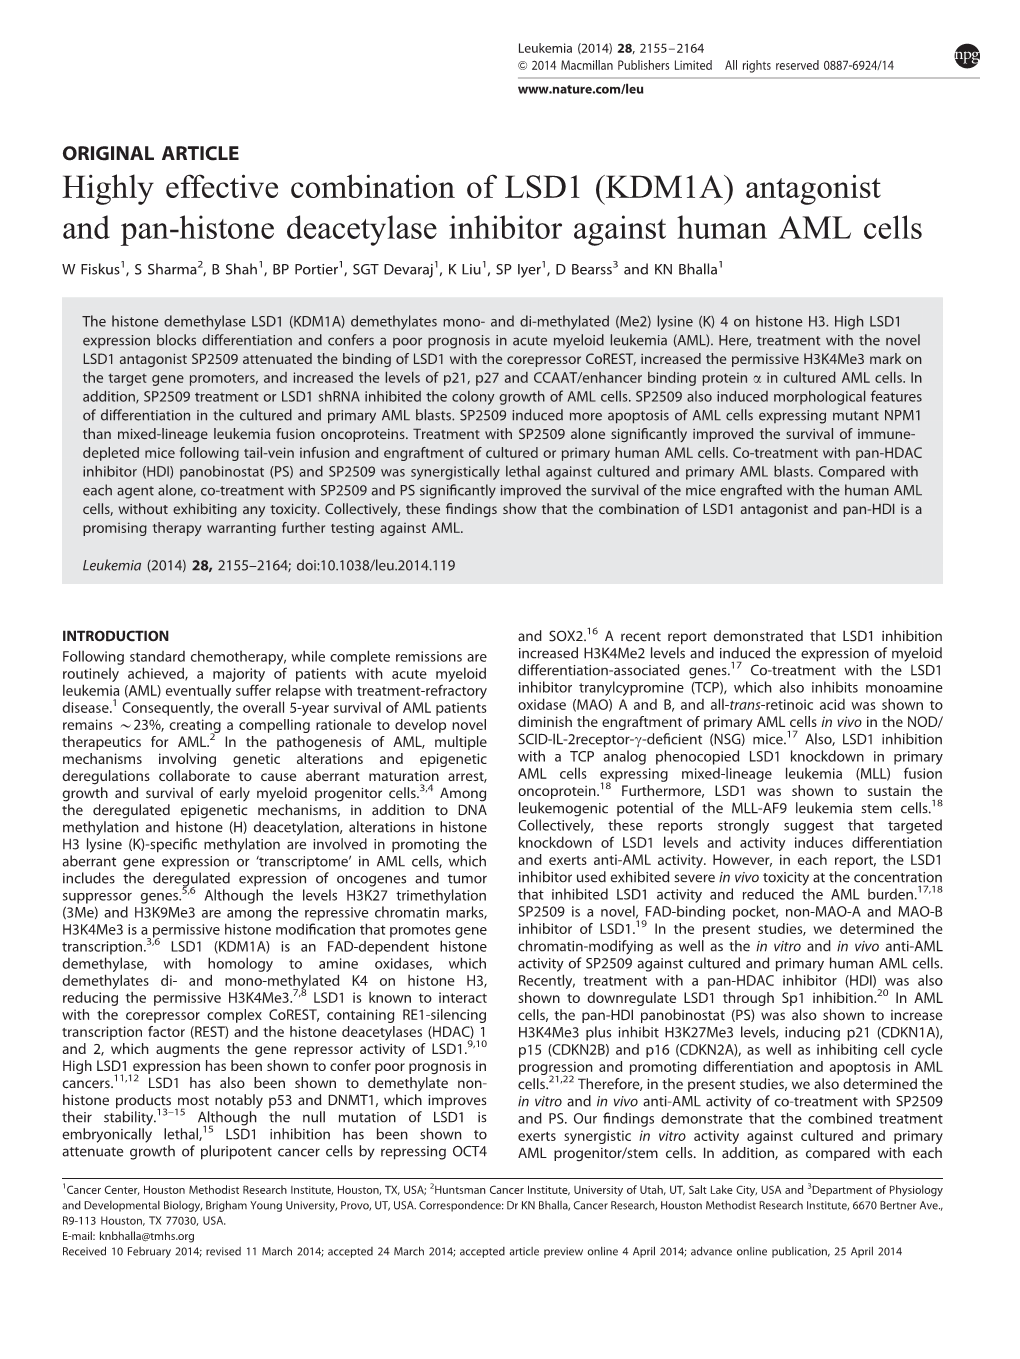 KDM1A) Antagonist and Pan-Histone Deacetylase Inhibitor Against Human AML Cells